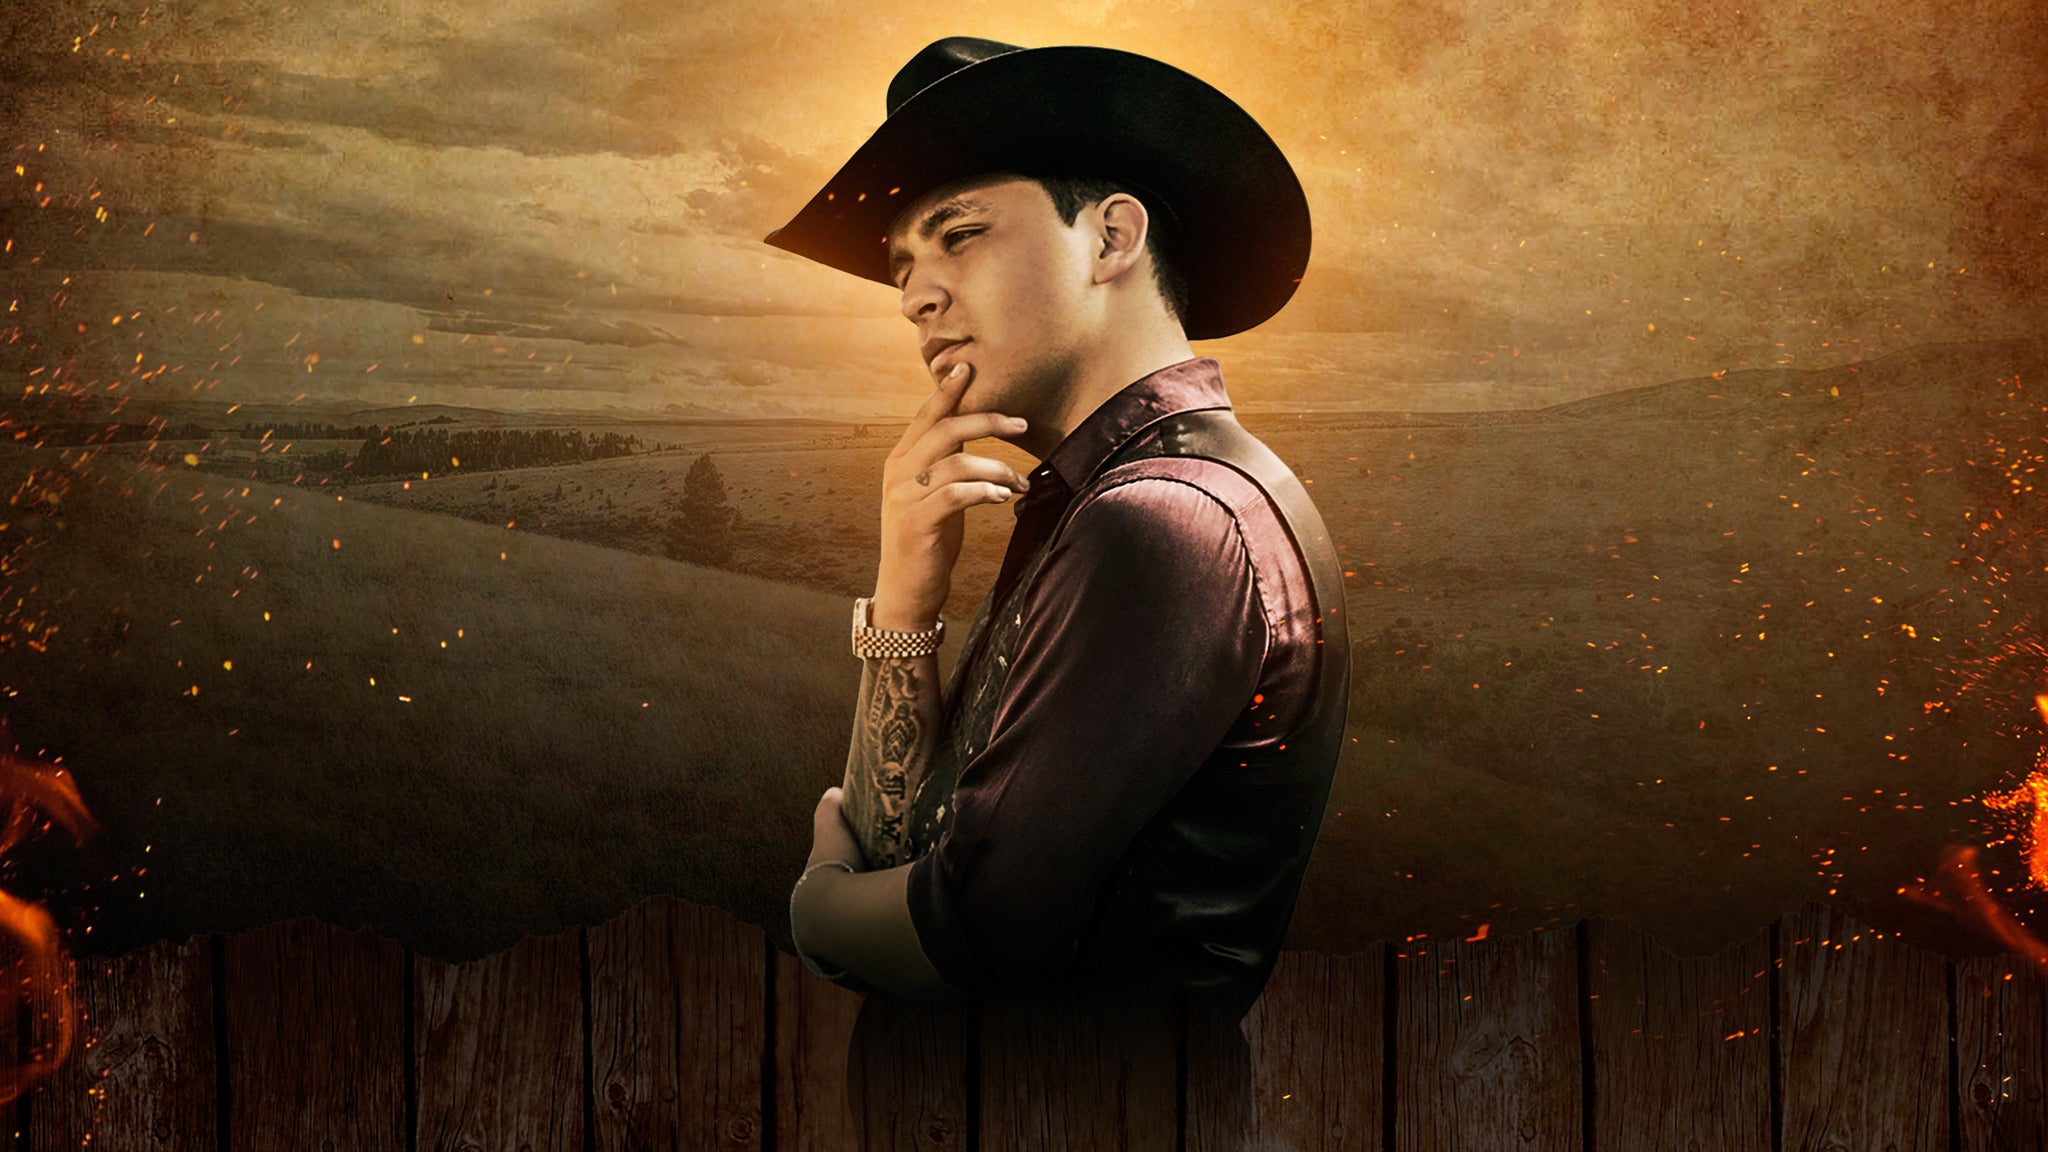 Christian Nodal - Ahora - SOLD OUT! in Hollywood promo photo for Live Nation presale offer code